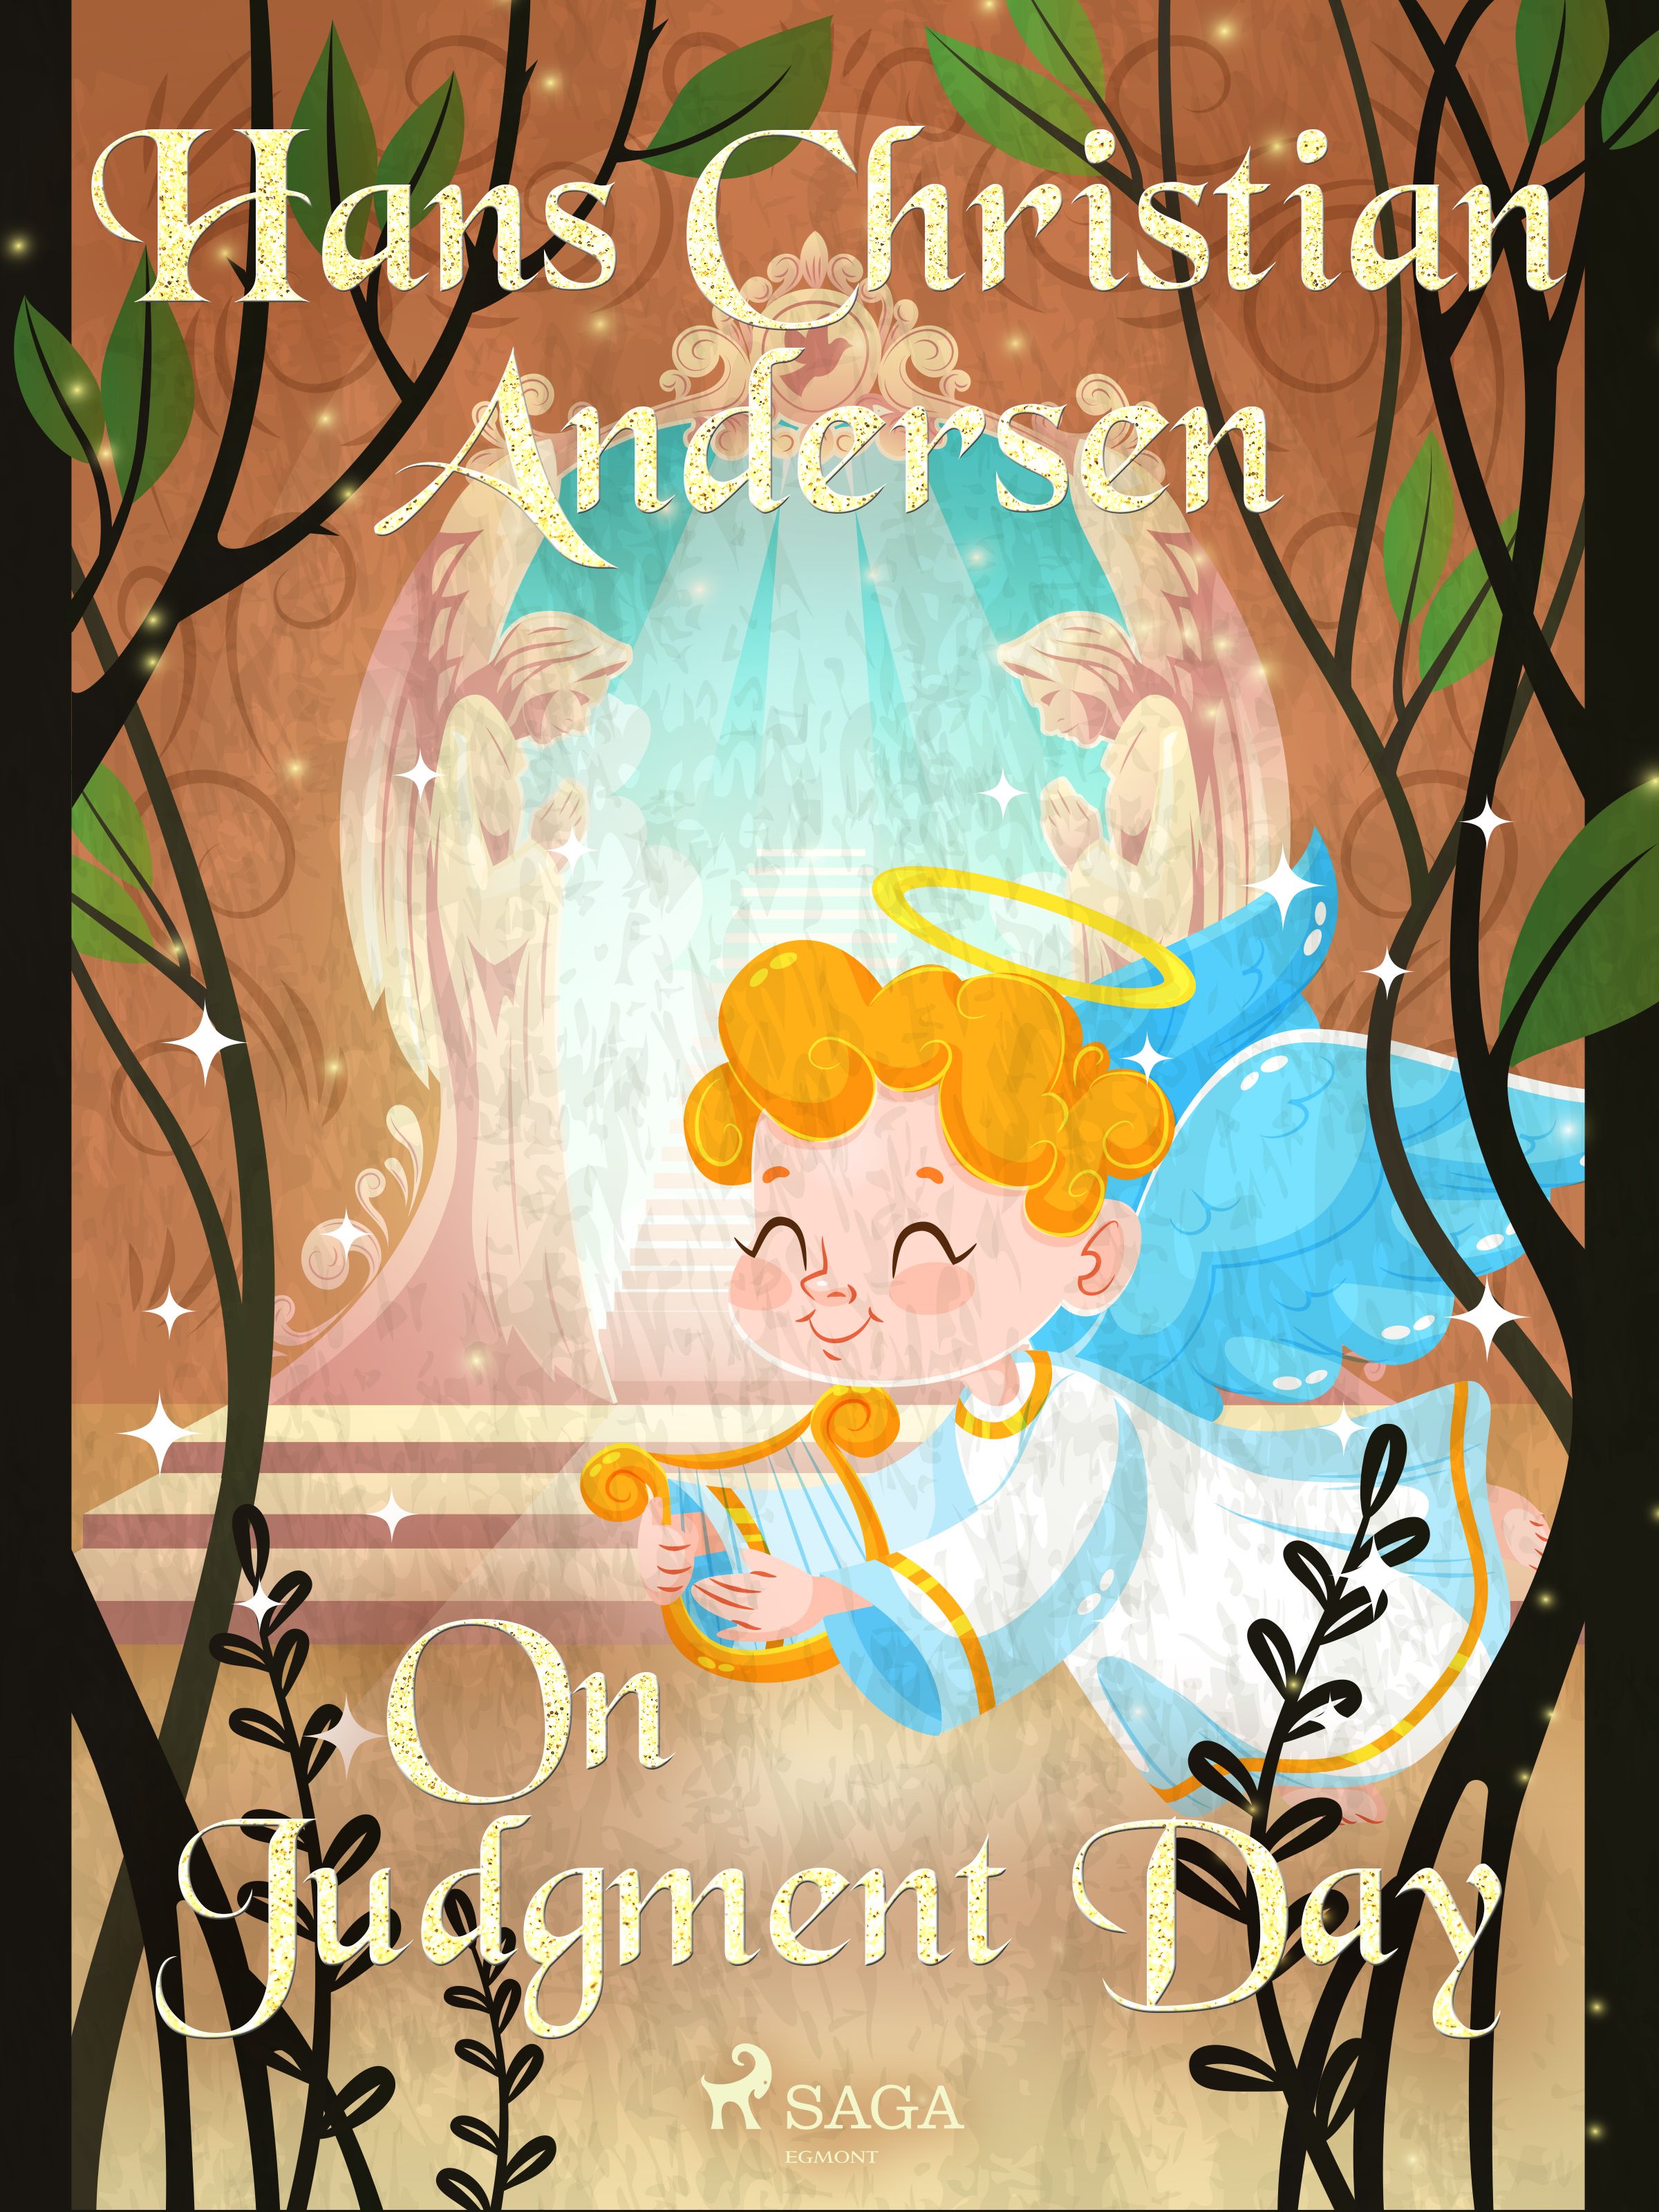 On Judgment Day, eBook by Hans Christian Andersen